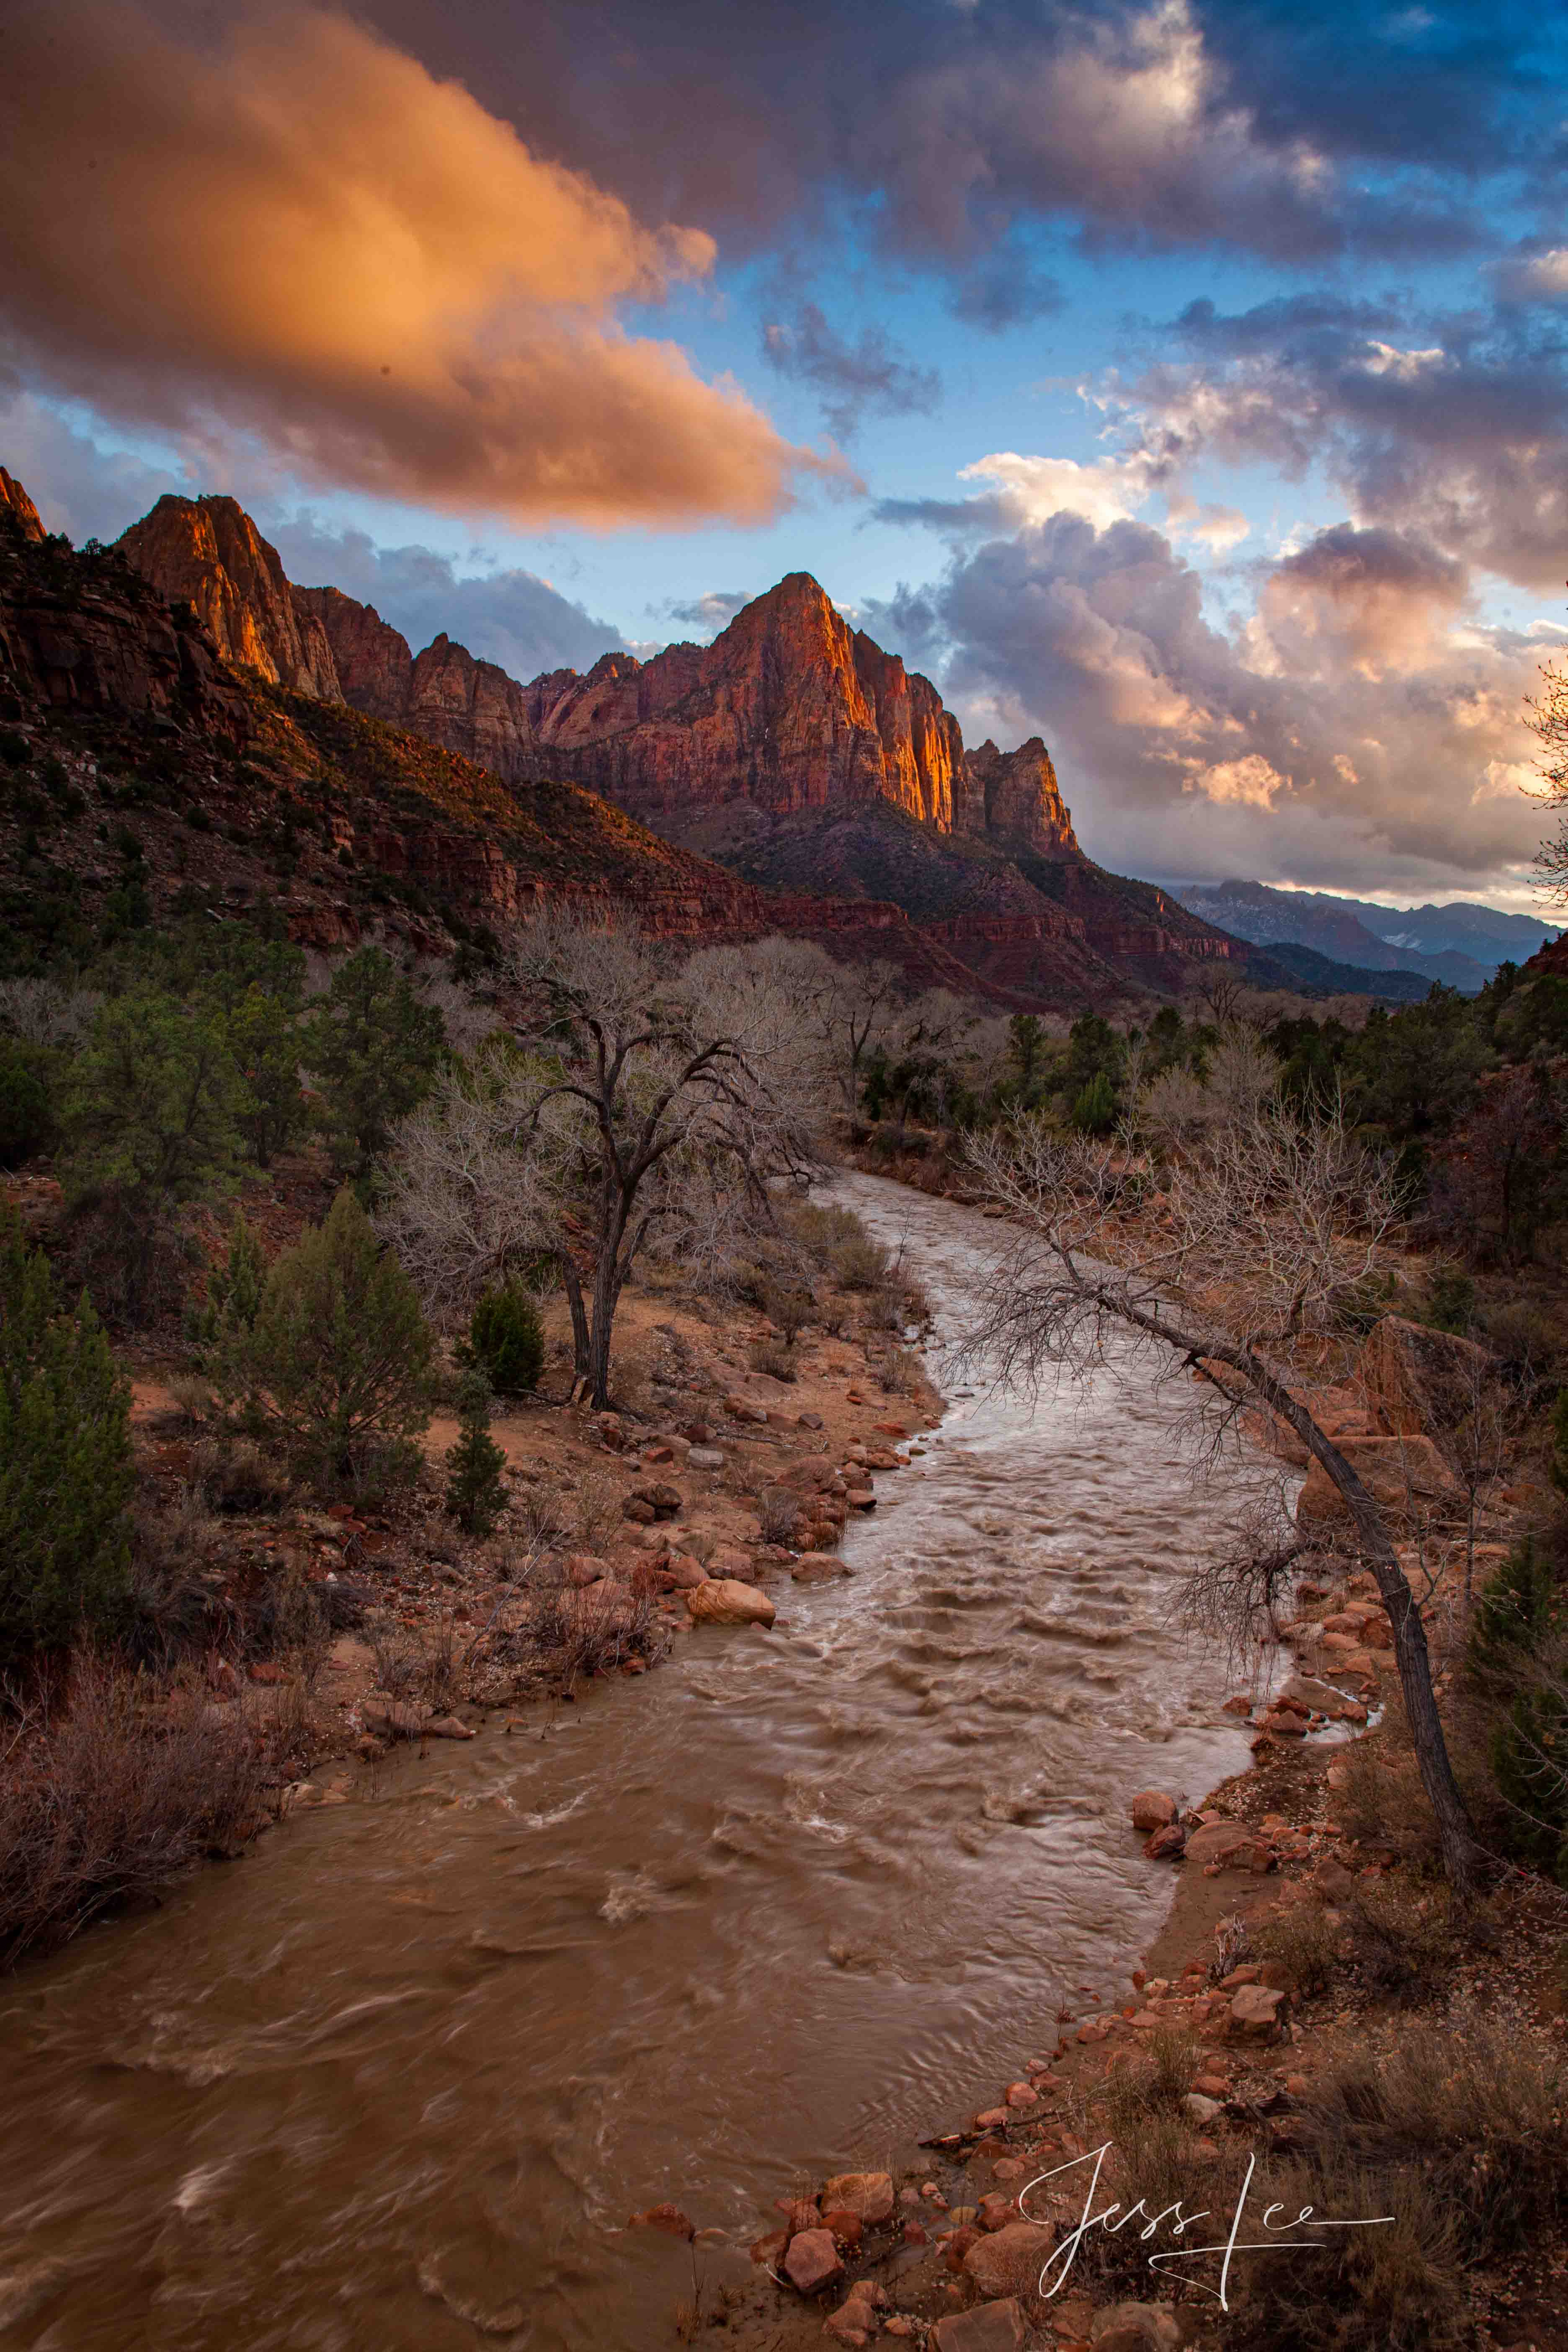 Limited Edition of 50 Exclusive high-resolution Museum Quality Fine Art Photography Prints Virgin River Drama in the American...